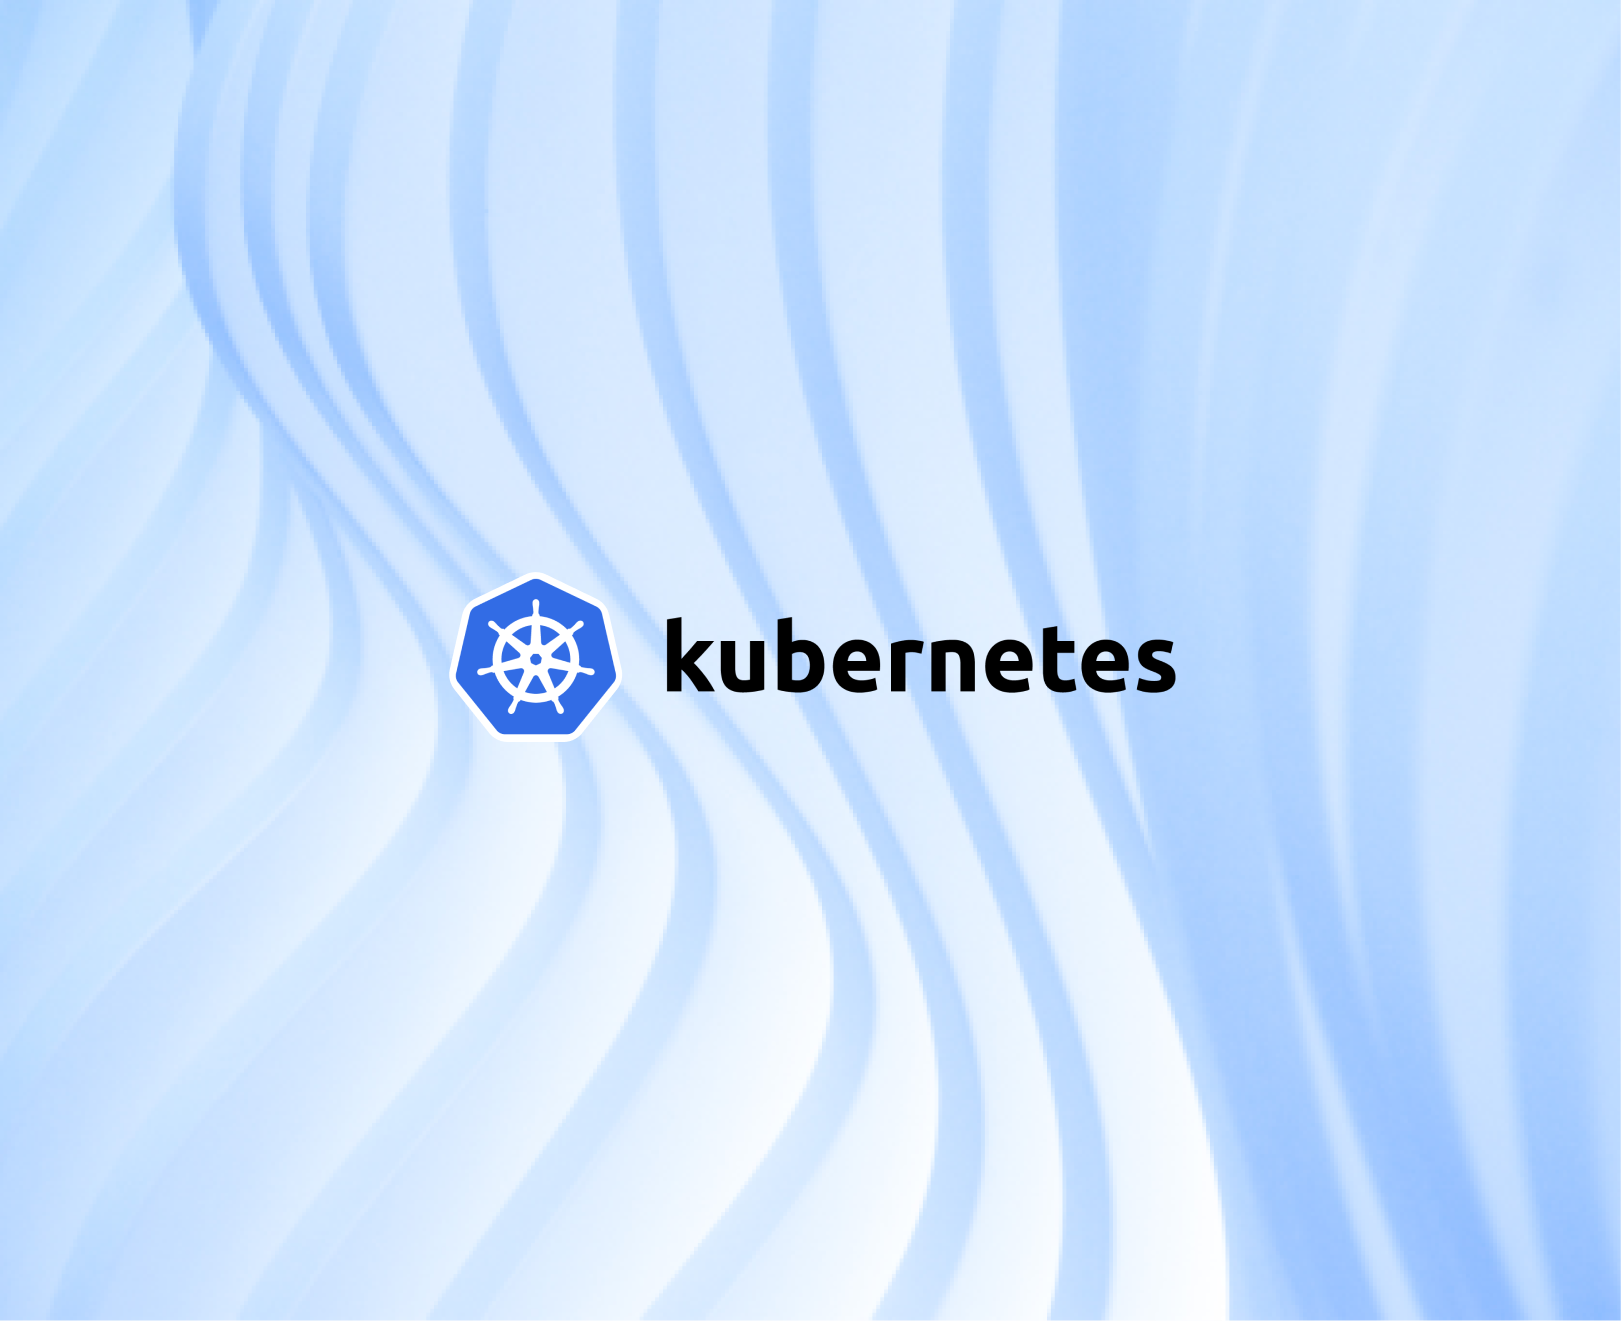 6 Kubernetes newsletters to read